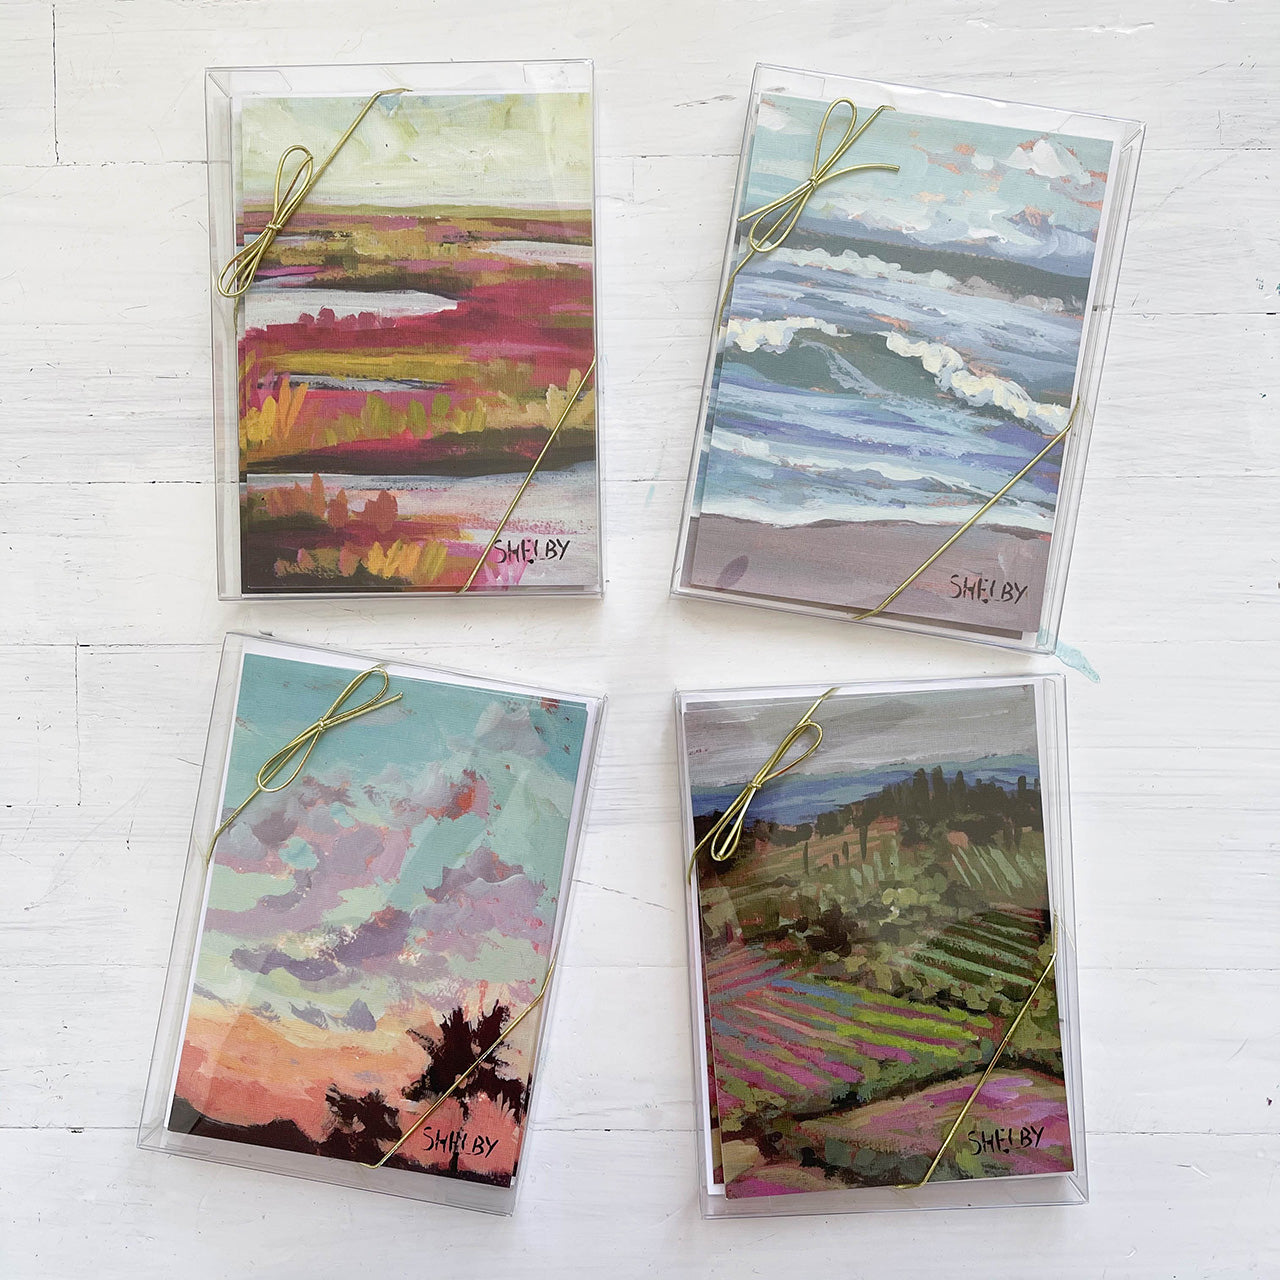 5x7 Note Cards - Summer Sunrise - featured in Art On Fire 2020 - Shelby  Dillon Studio